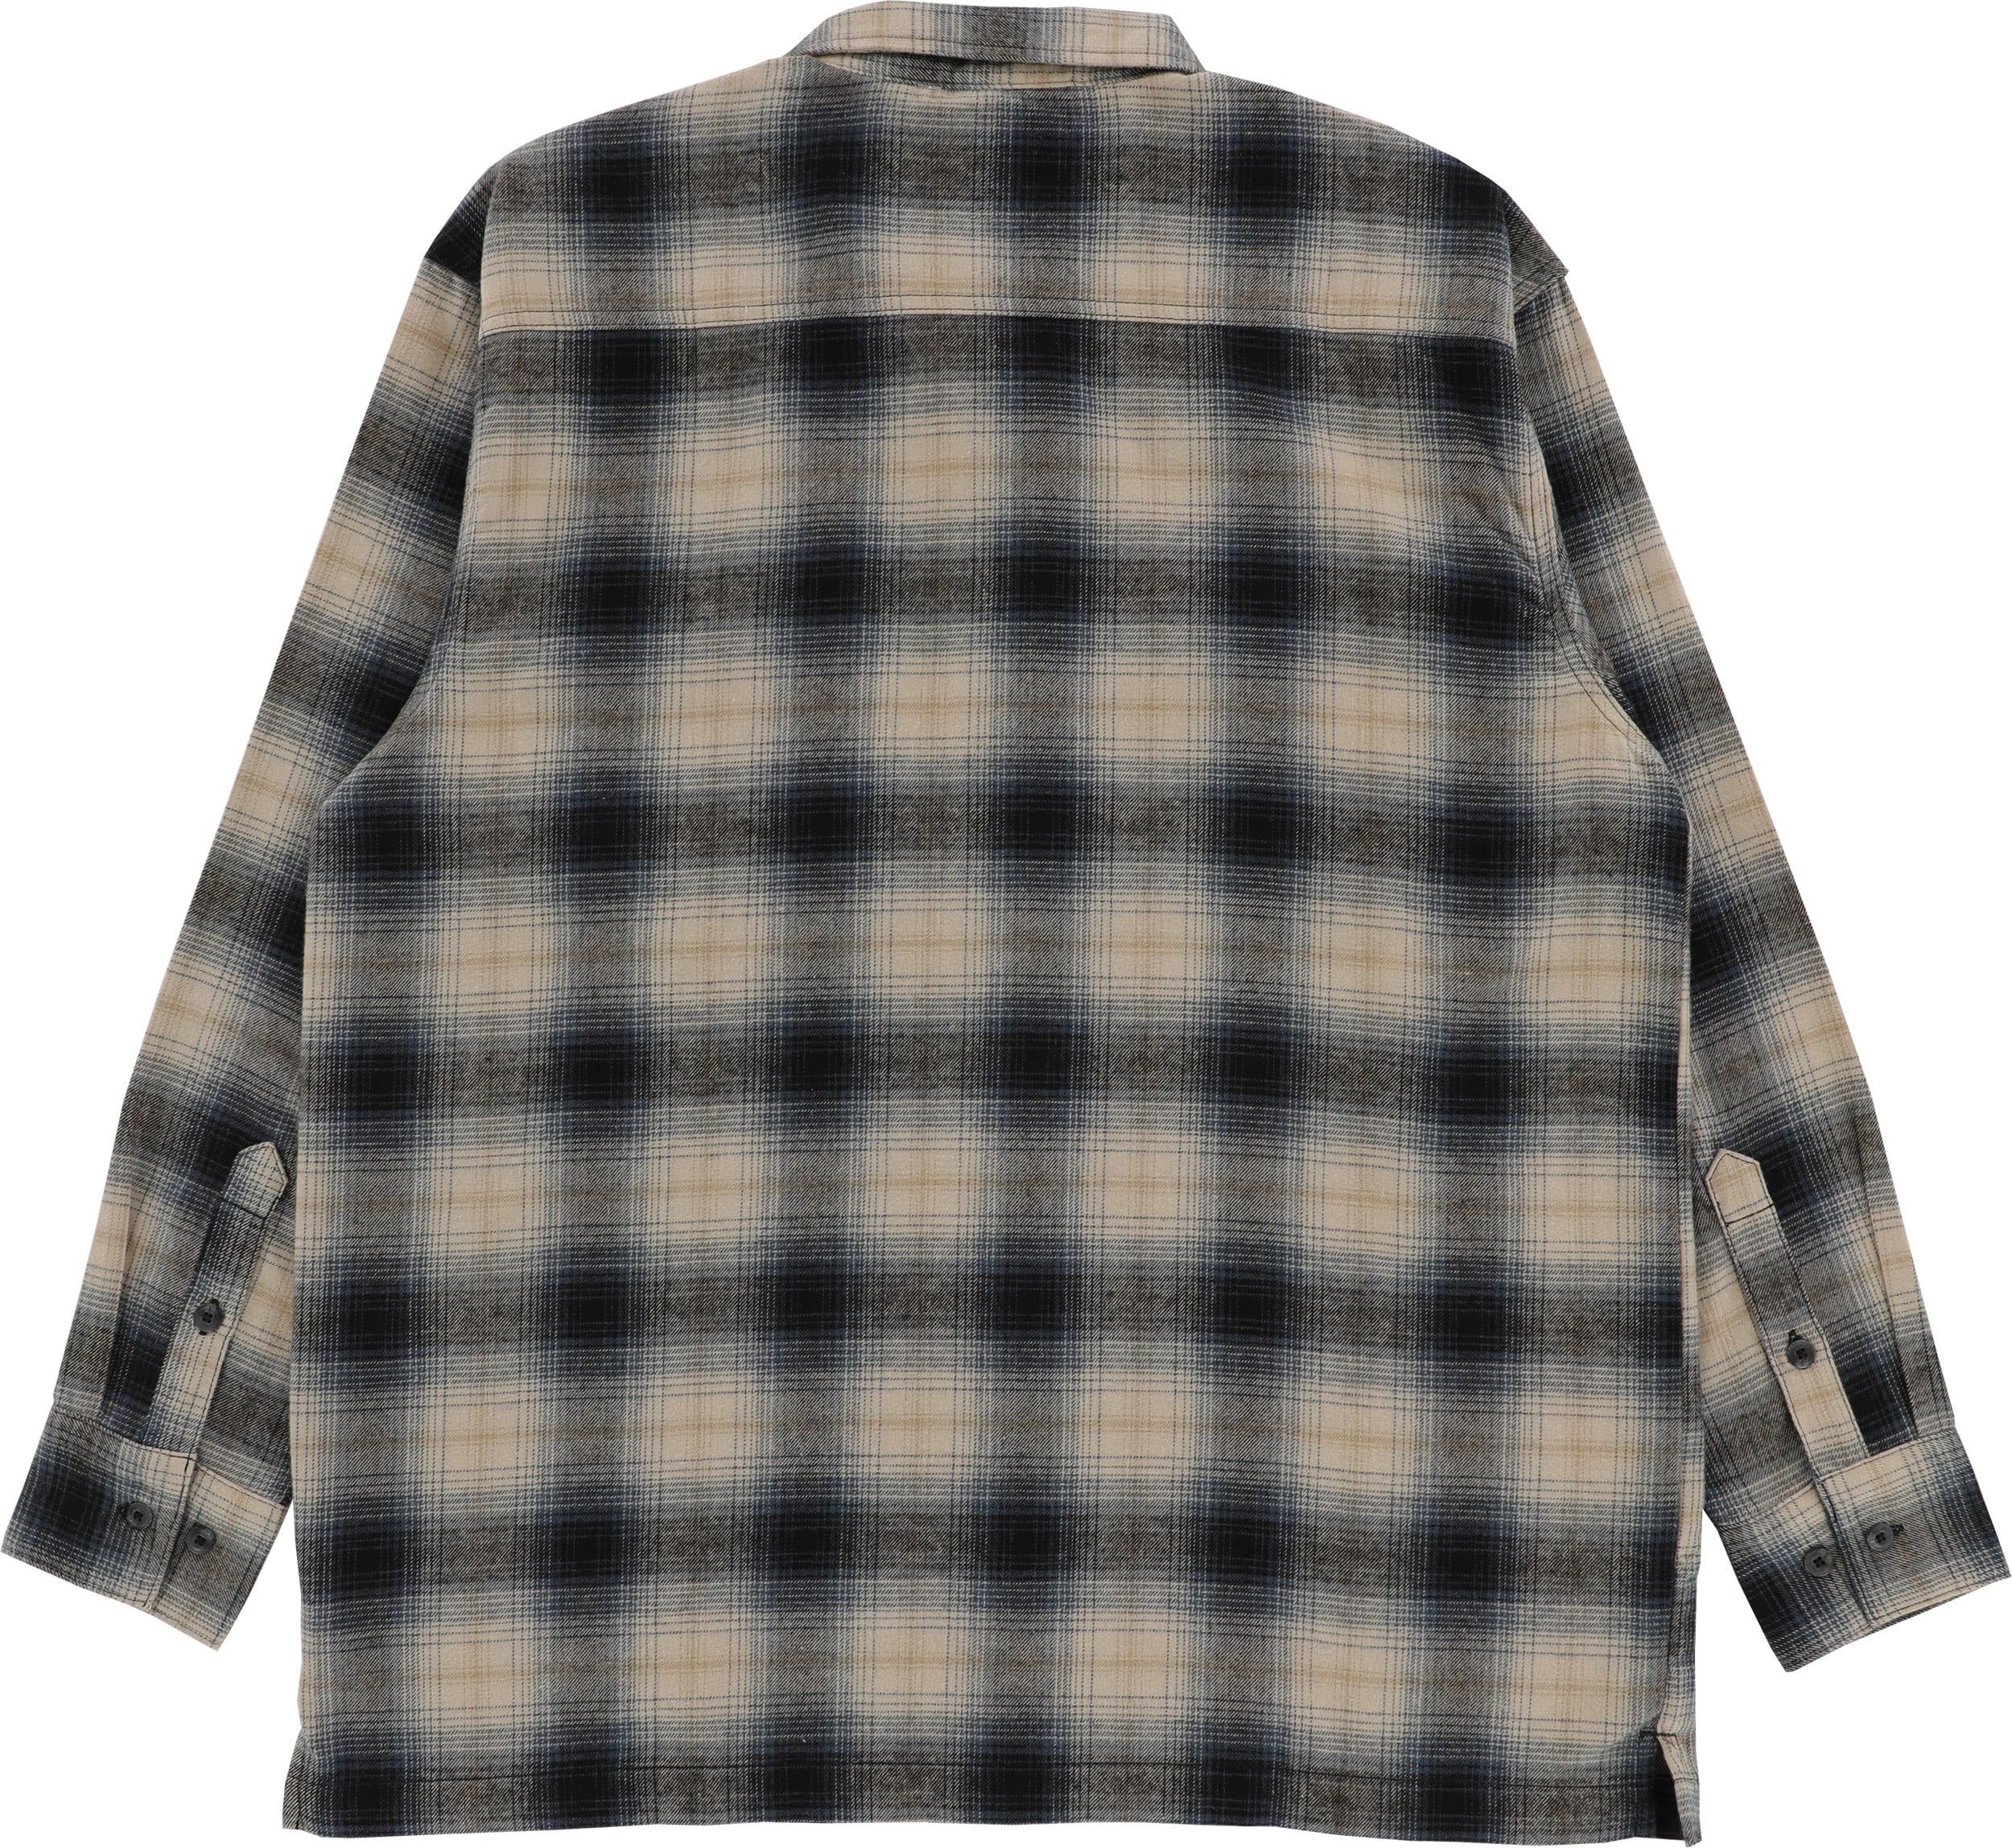 Dickies Ronnie Sandoval Flannel Shirt - blue ombre plaid | Tactics